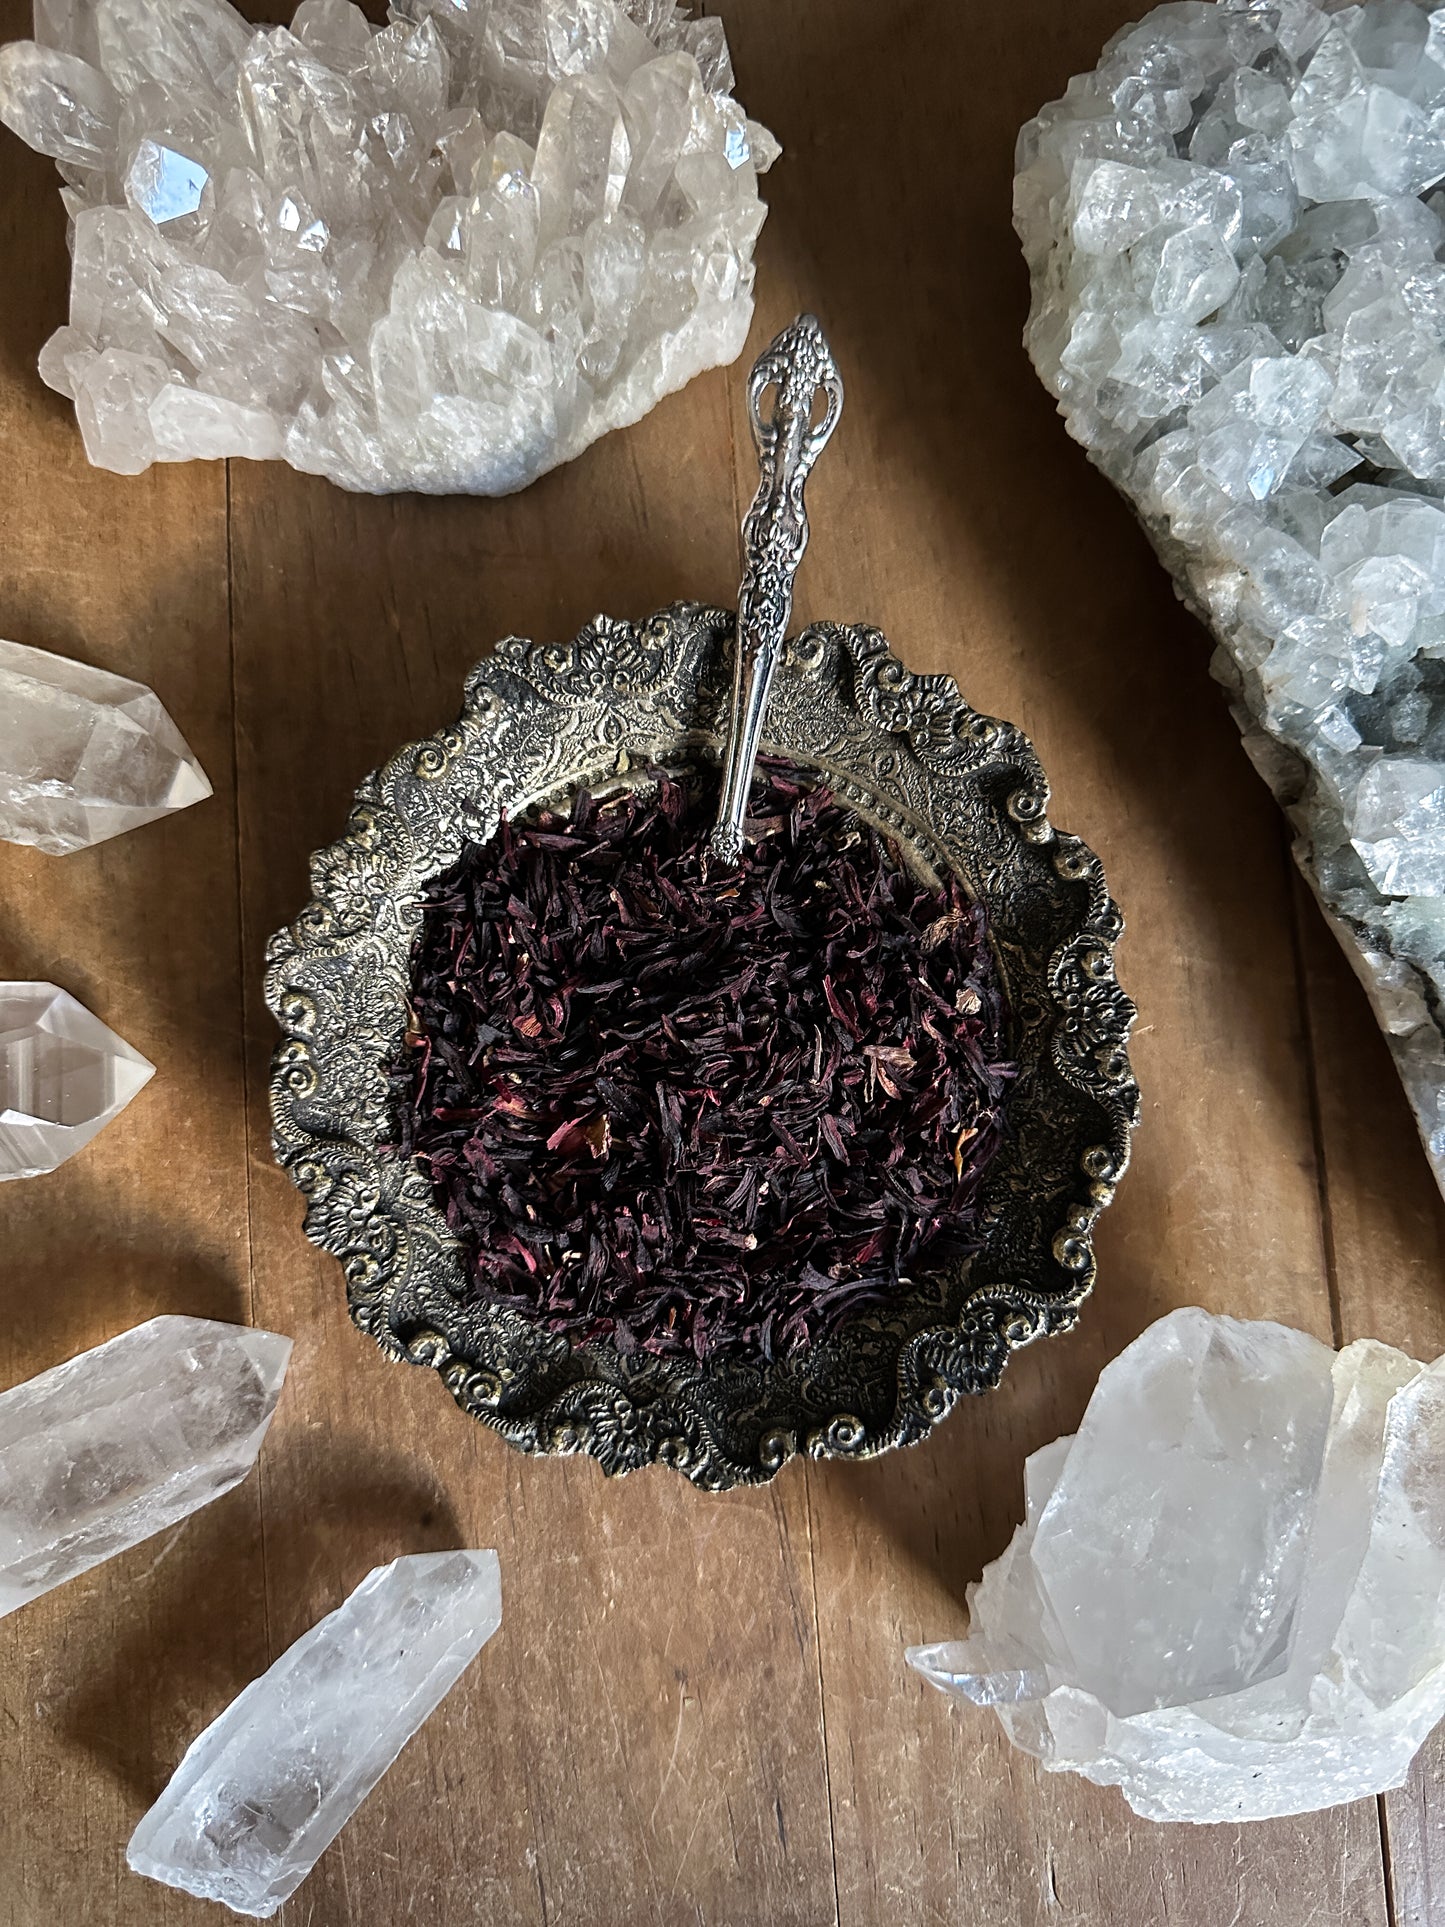 Hibiscus Flower Cut - Ritual Apothecary